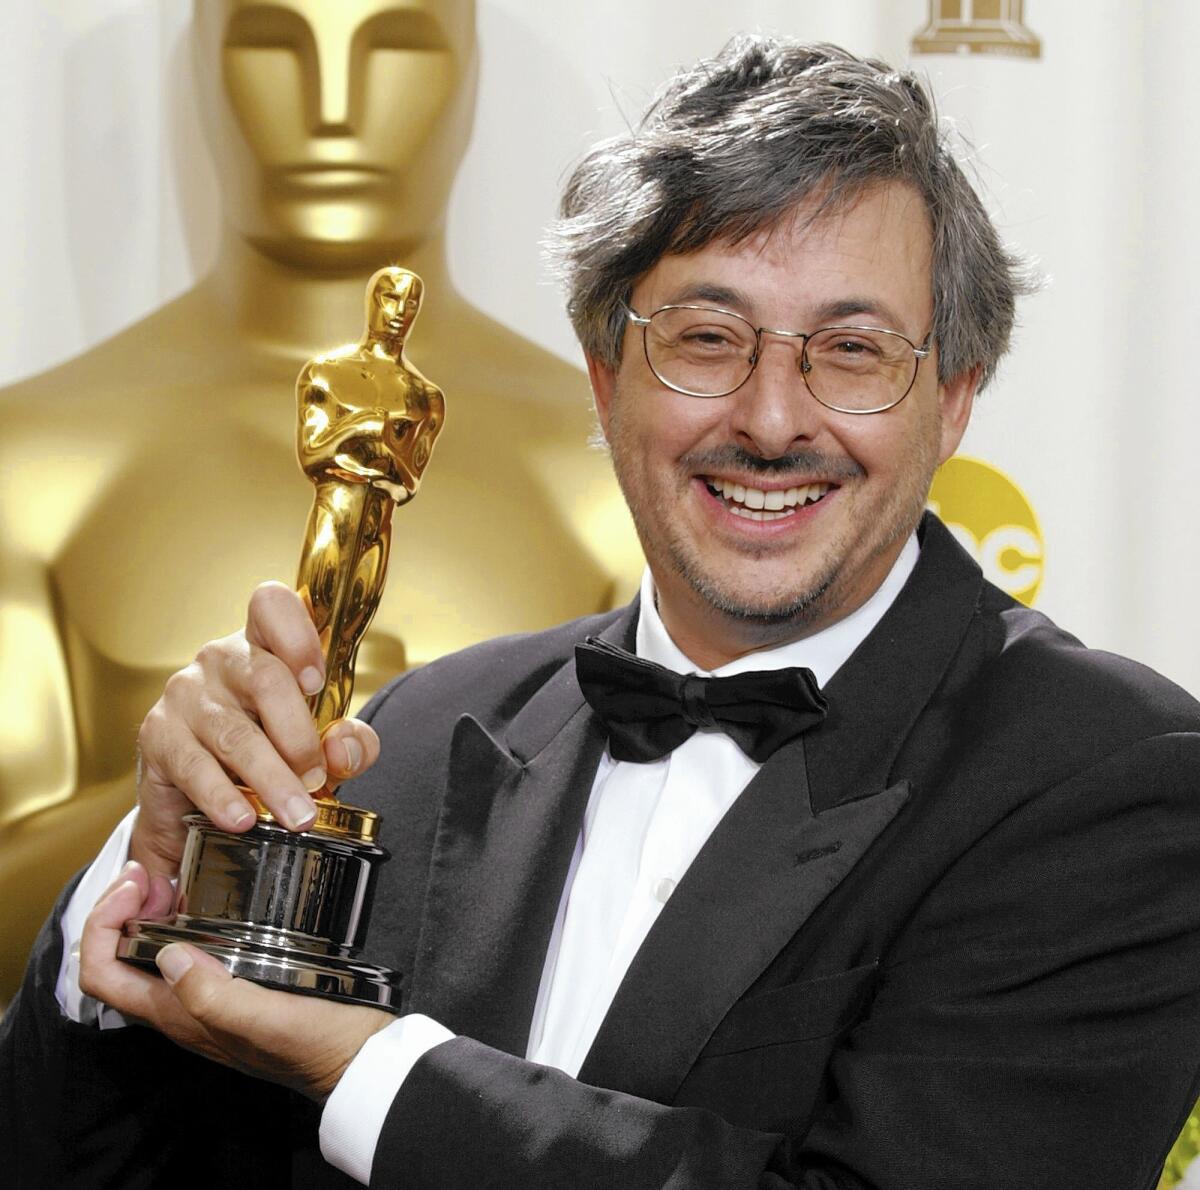 Cinematographer Andrew Lesnie, who died Monday at 59, won an Oscar for "Lord of the Rings: The Fellowship of the Rings" in 2002.